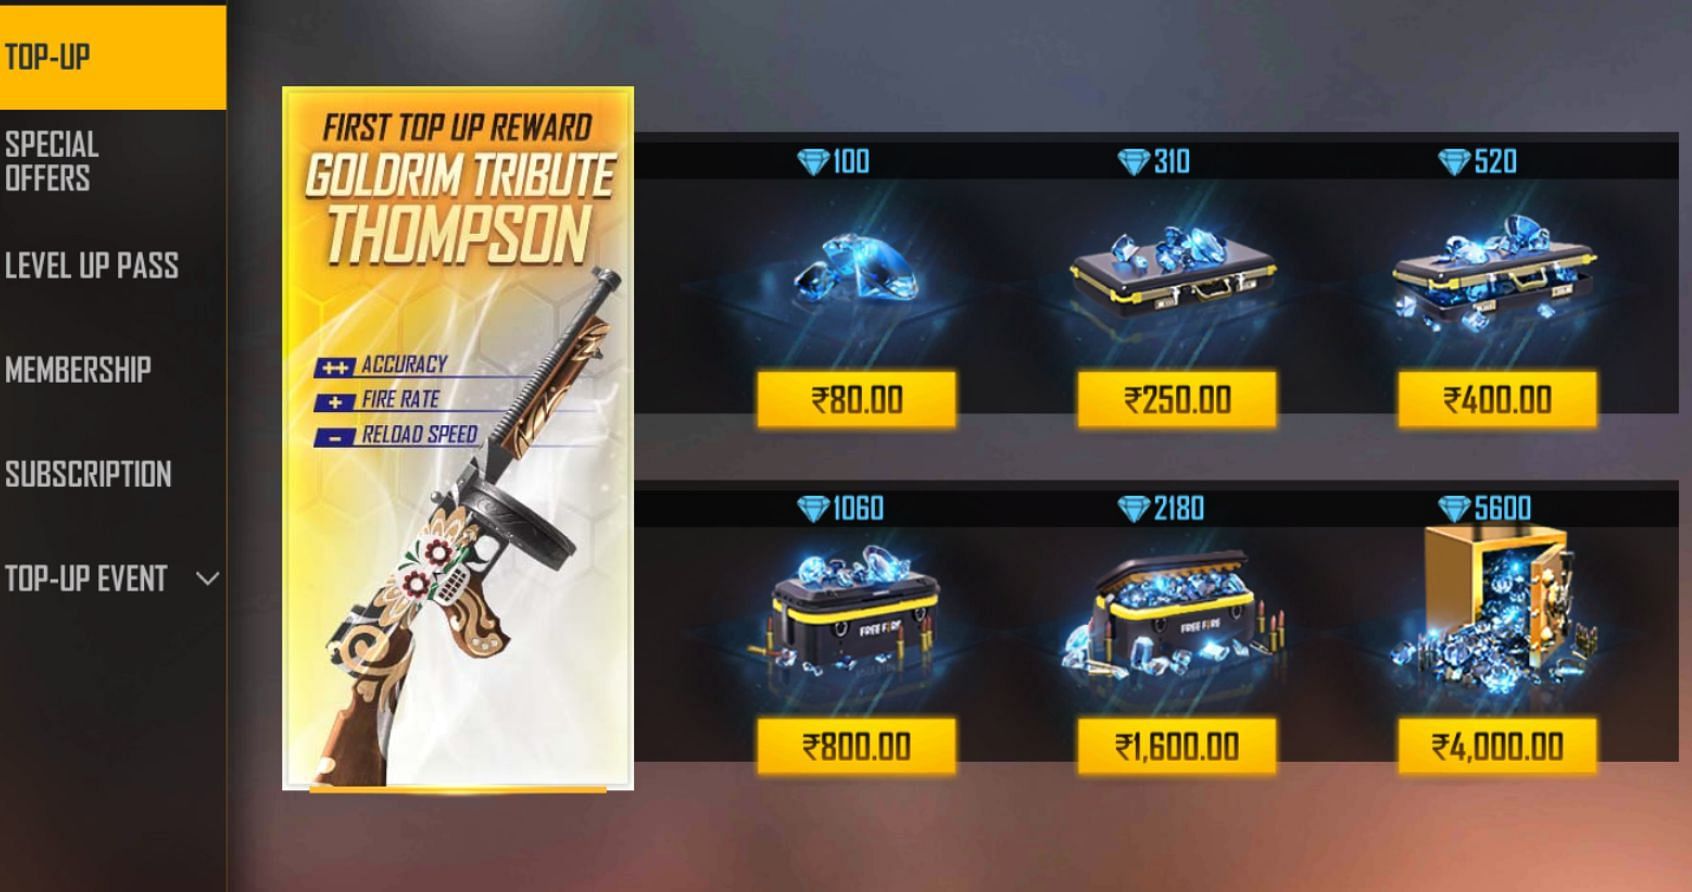 Purchasing a certain number of diamonds during specific top-up events also grants free rewards (Image via Garena)